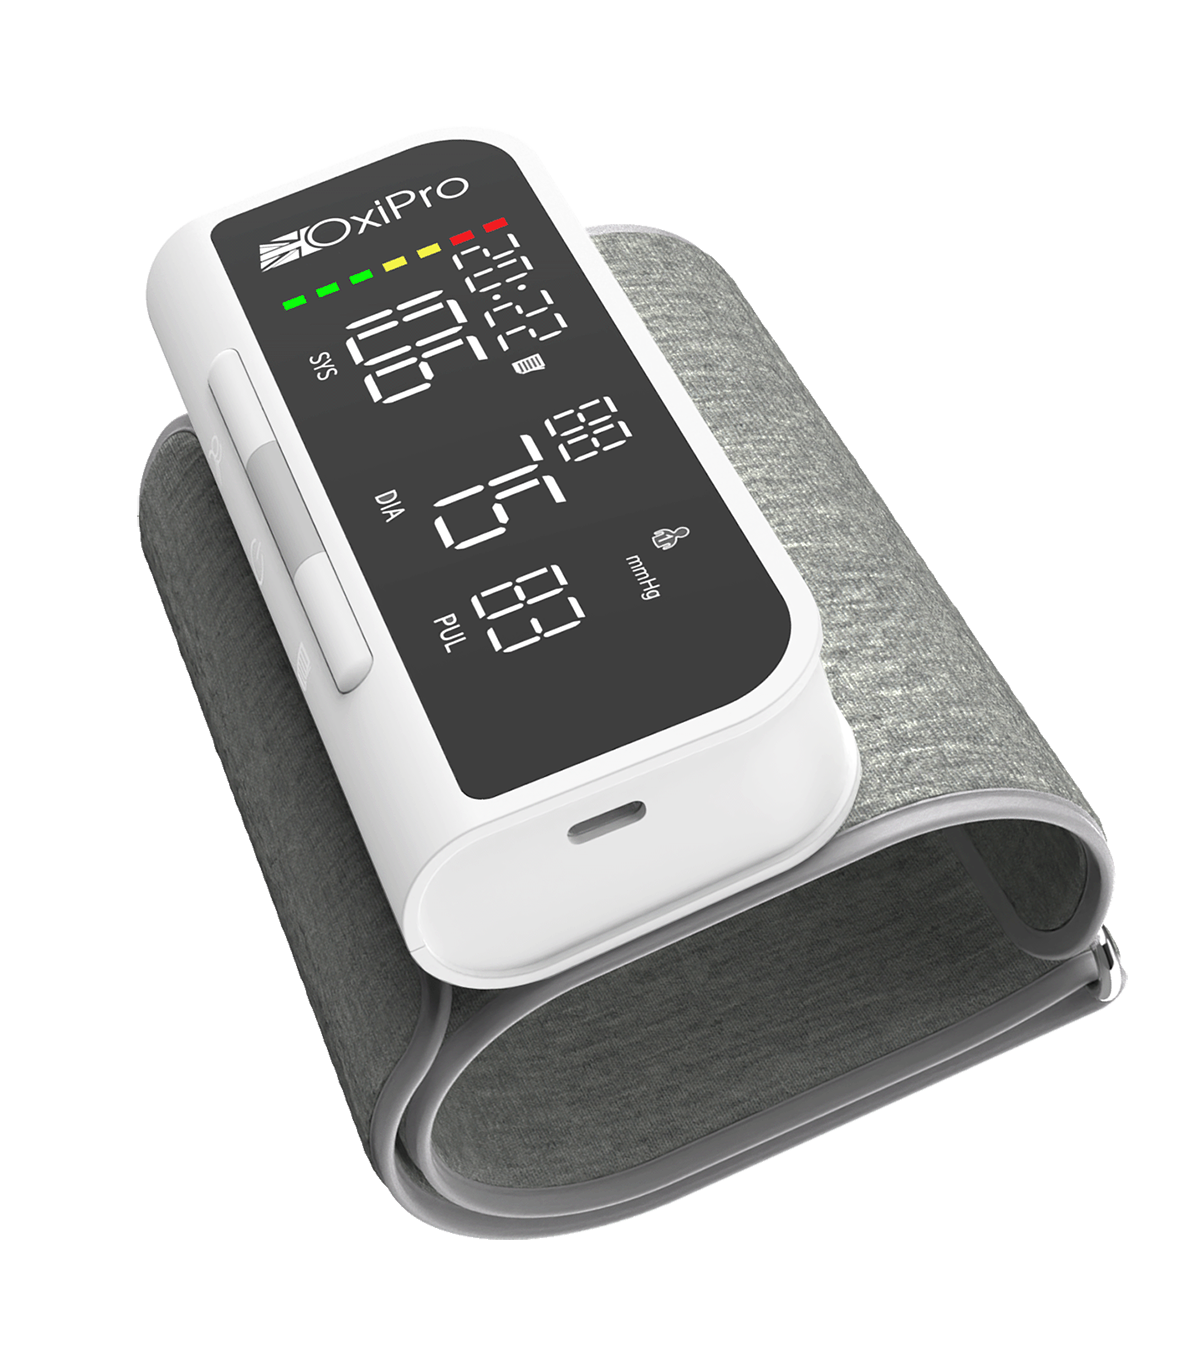 Oxipro BP1 Blood Pressure Monitor – OxiPro Medical Ltd